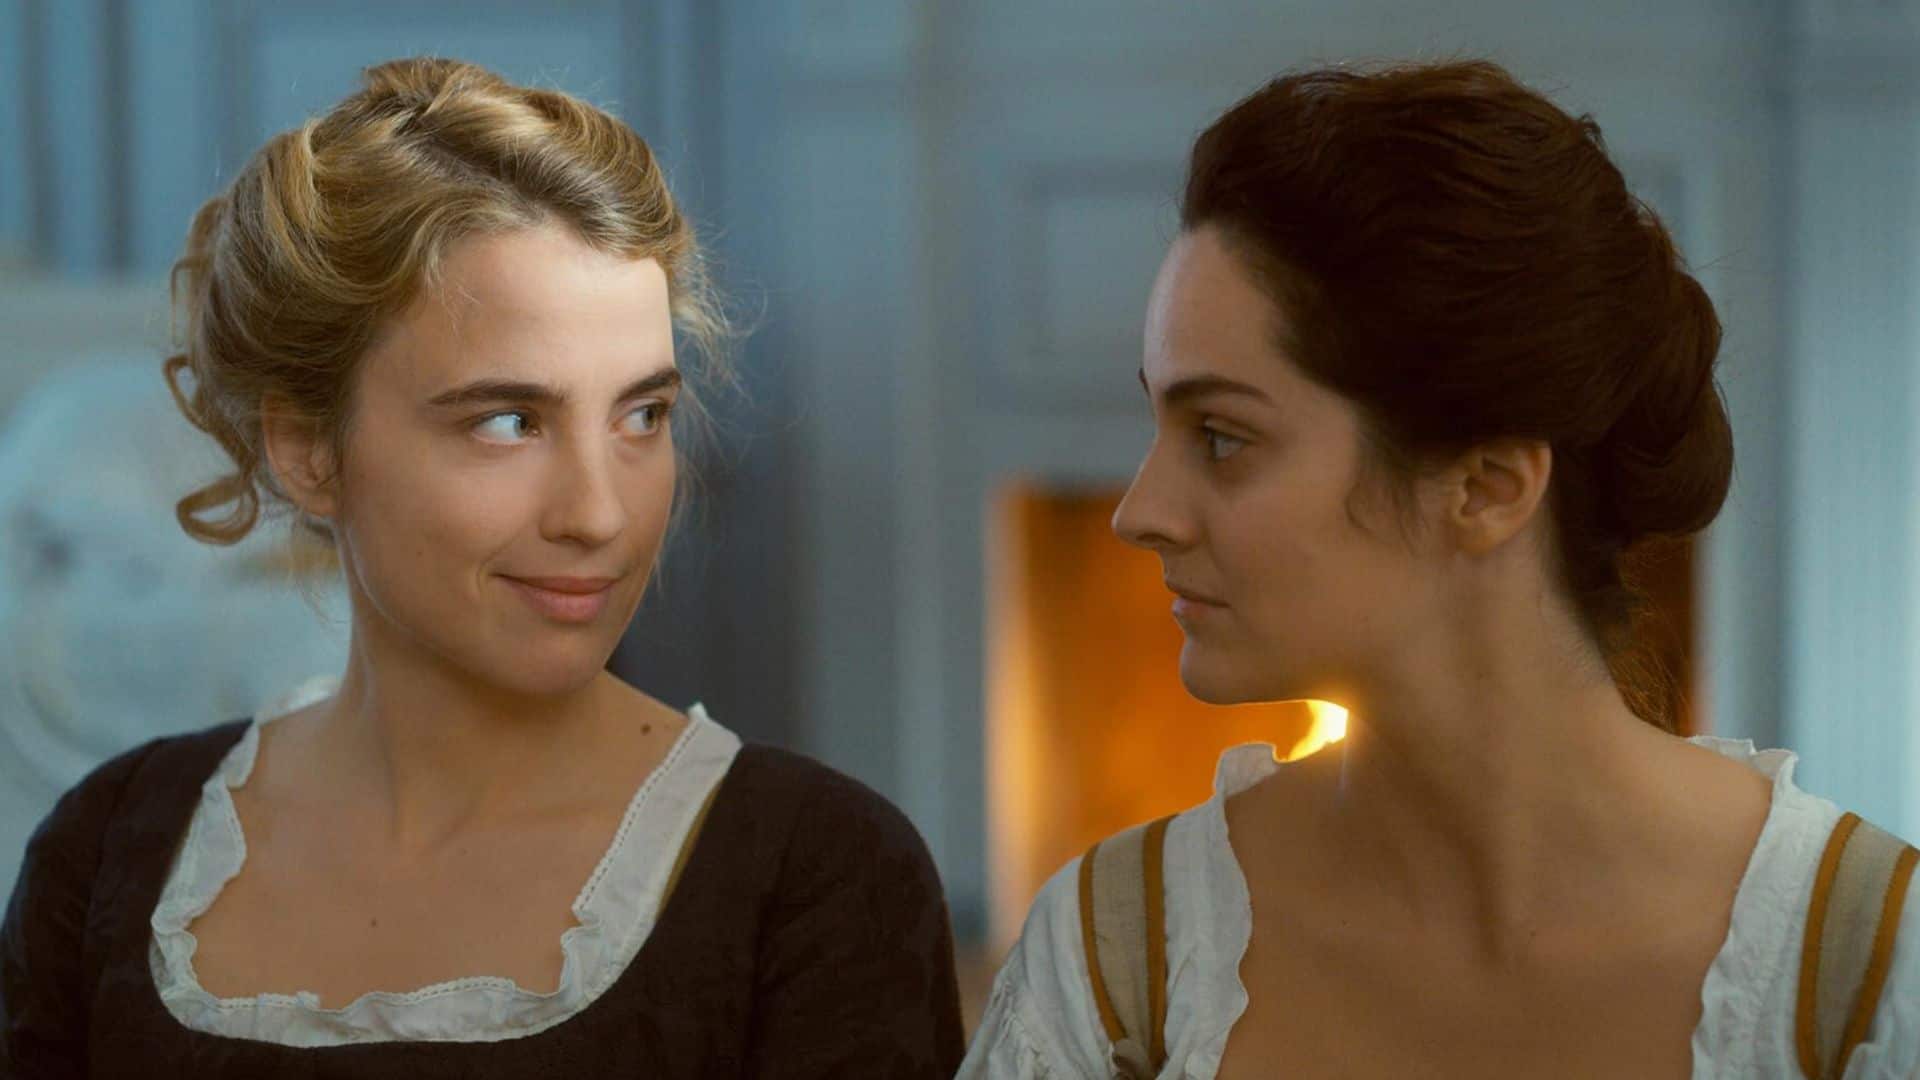 A blonde woman looks and smiles at a brunette woman in this image from Lilies Films.